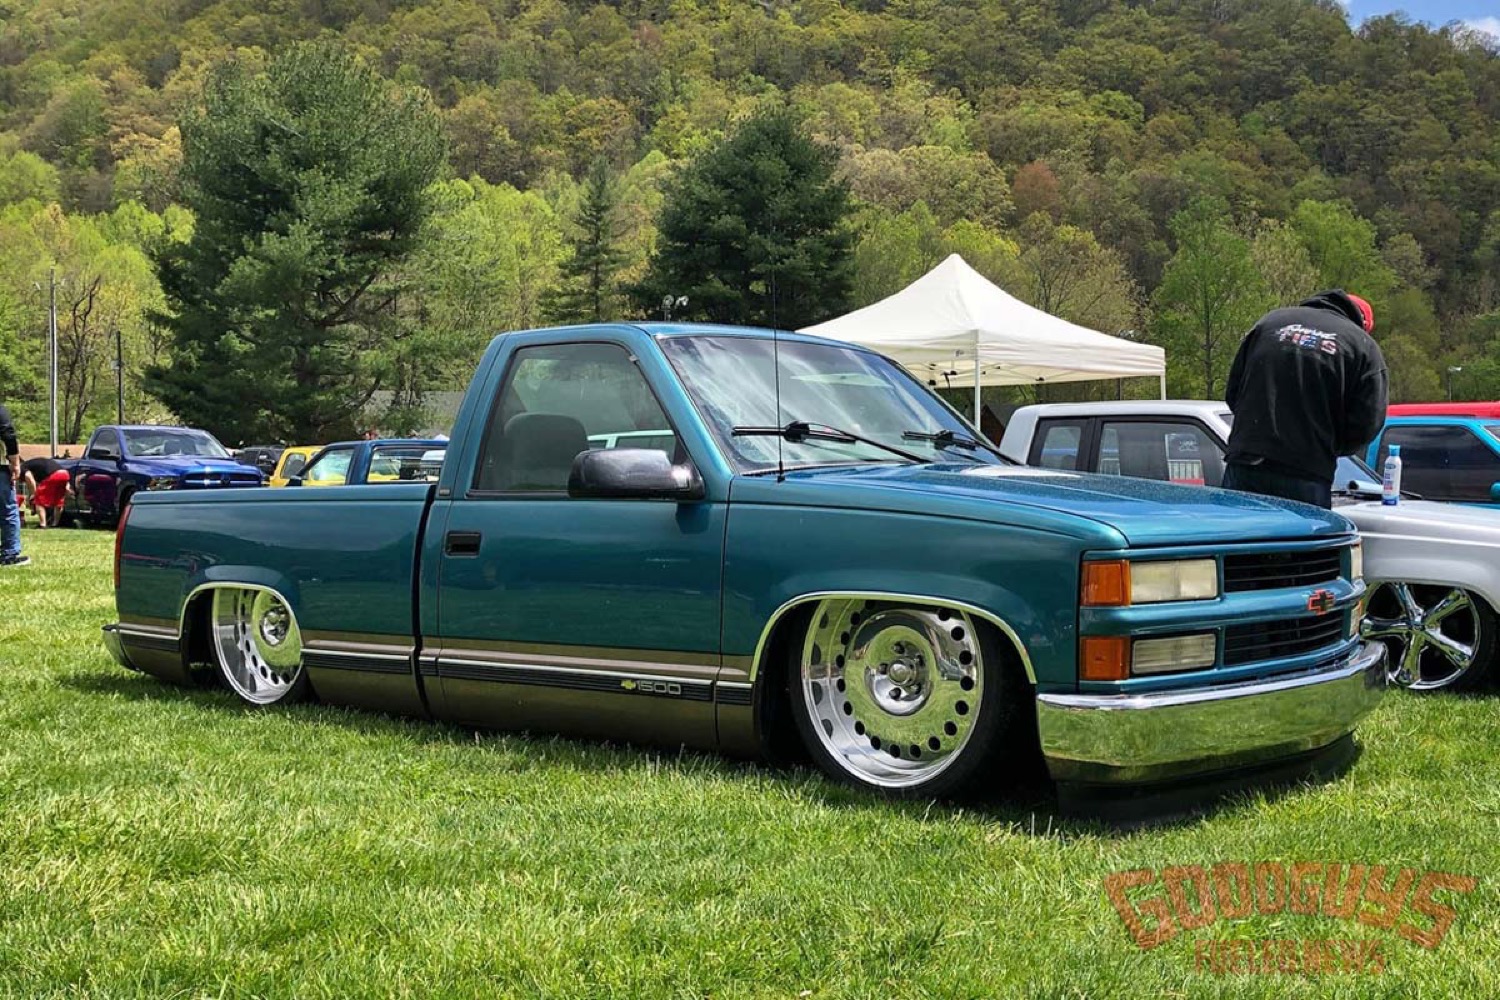 Goodguys Invites OBS GM Pickups To LMC Truck Spring Lone Star Nationals